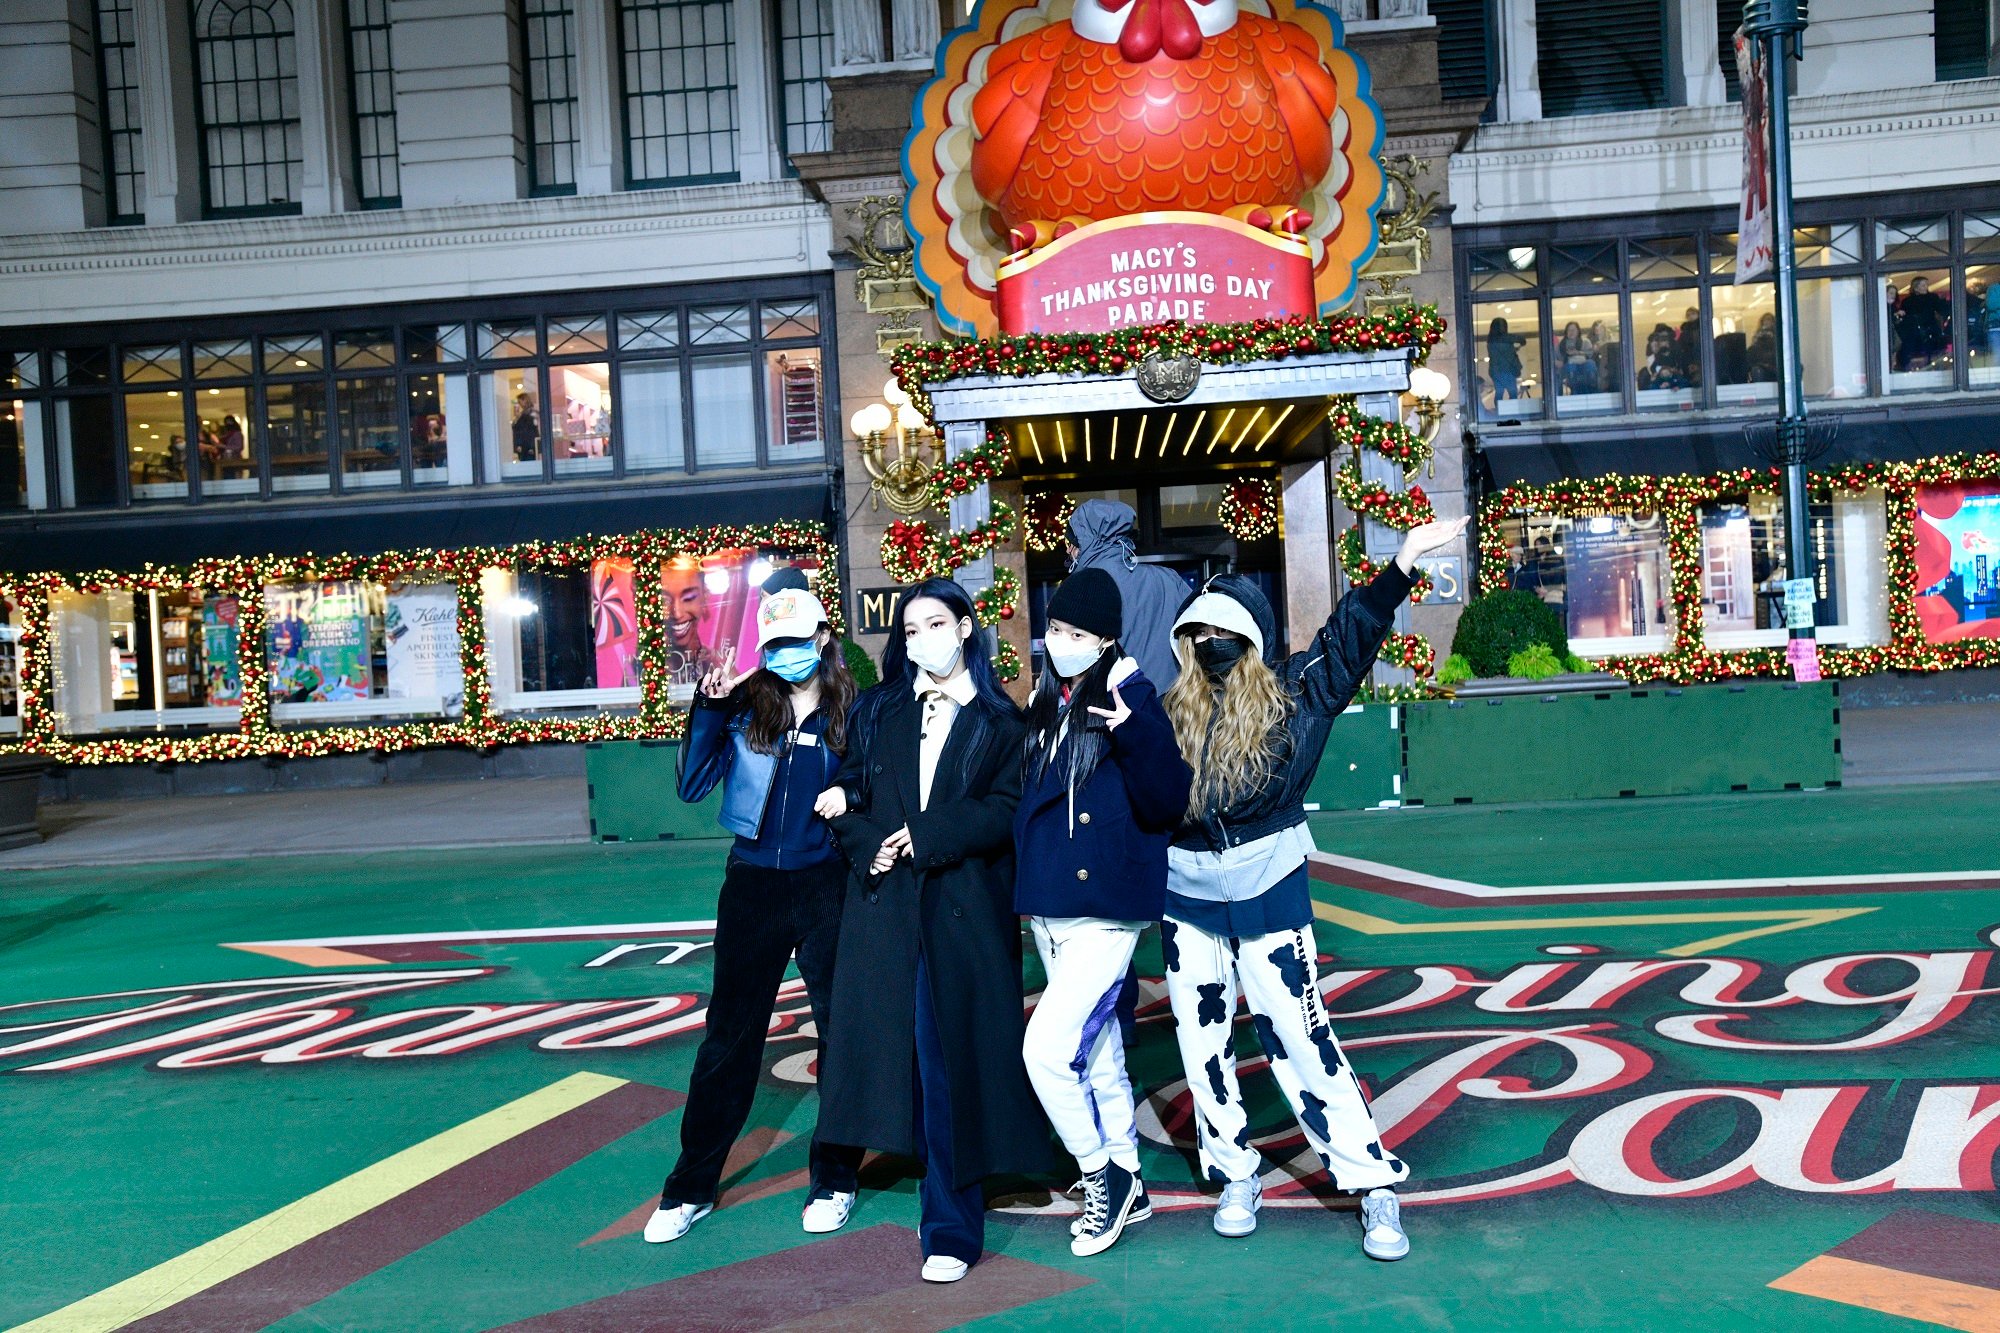 aespa Became the 1st Kpop Girl Group to Perform in the Macy's